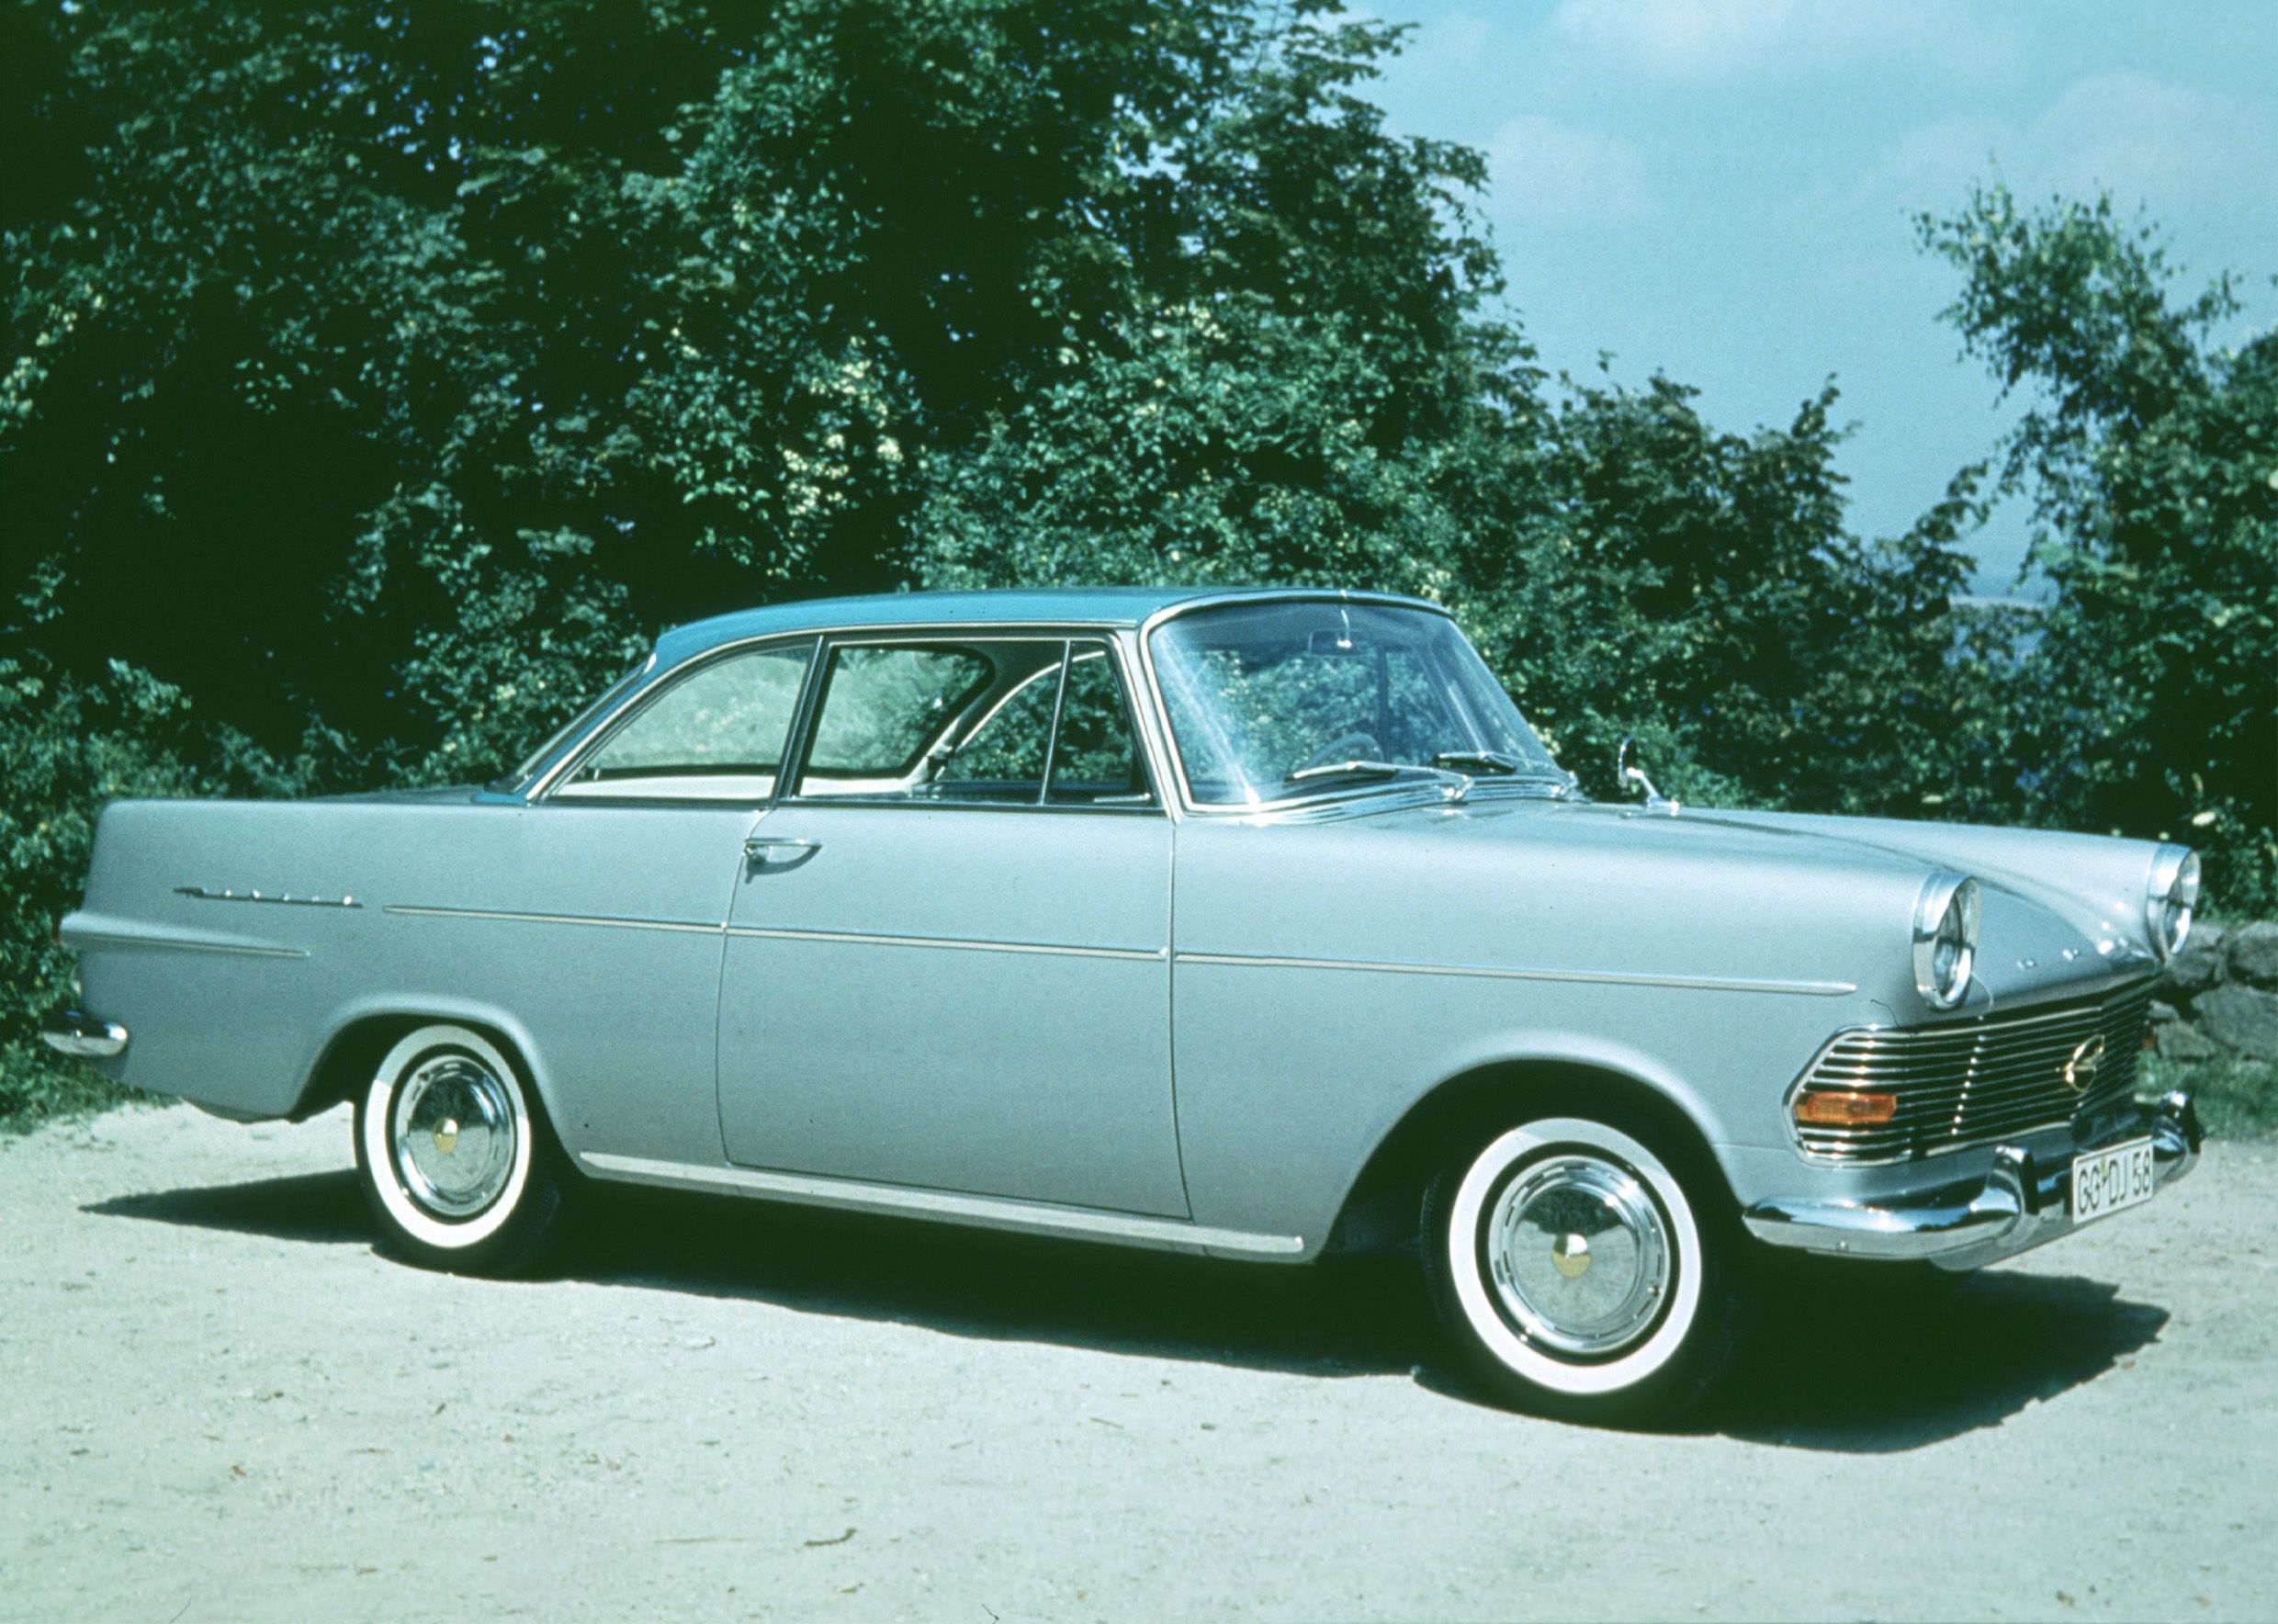 1961 Opel Rekord Coupe | Flickr - Photo Sharing!